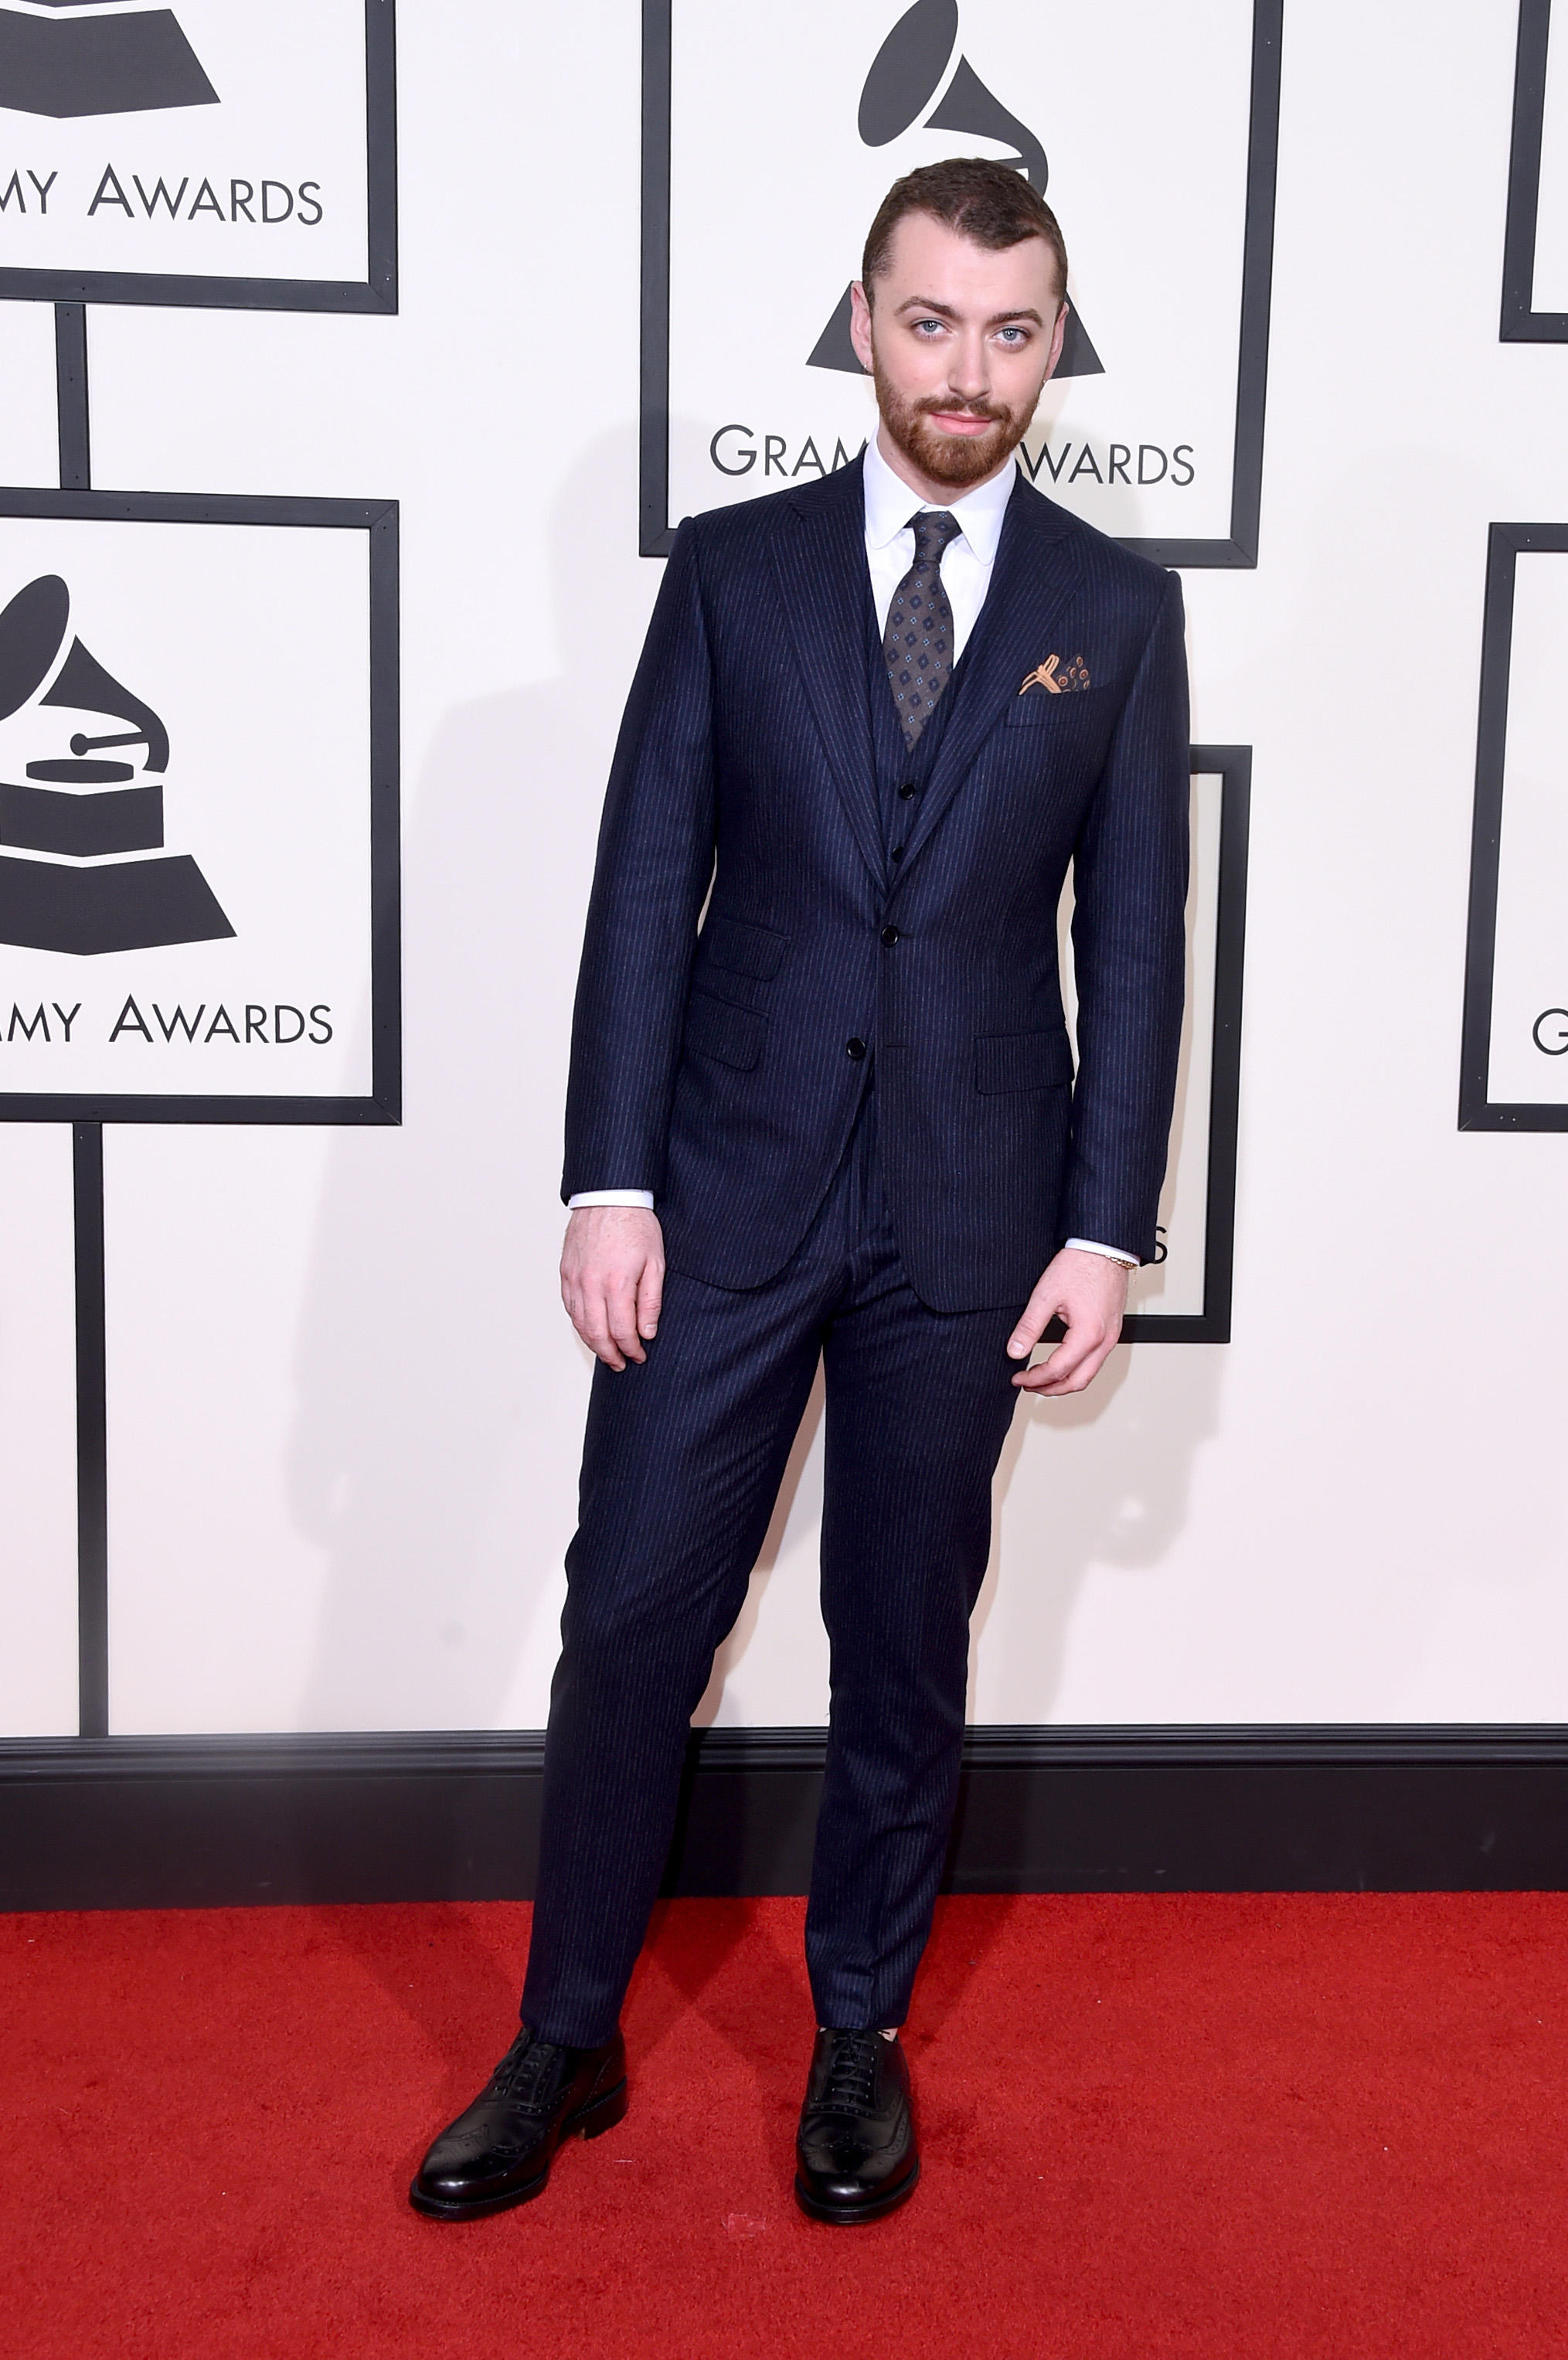 Sam Smith attends the 58th GRAMMY Awards at Staples Center on Feb. 15, 2016 in Los Angeles.